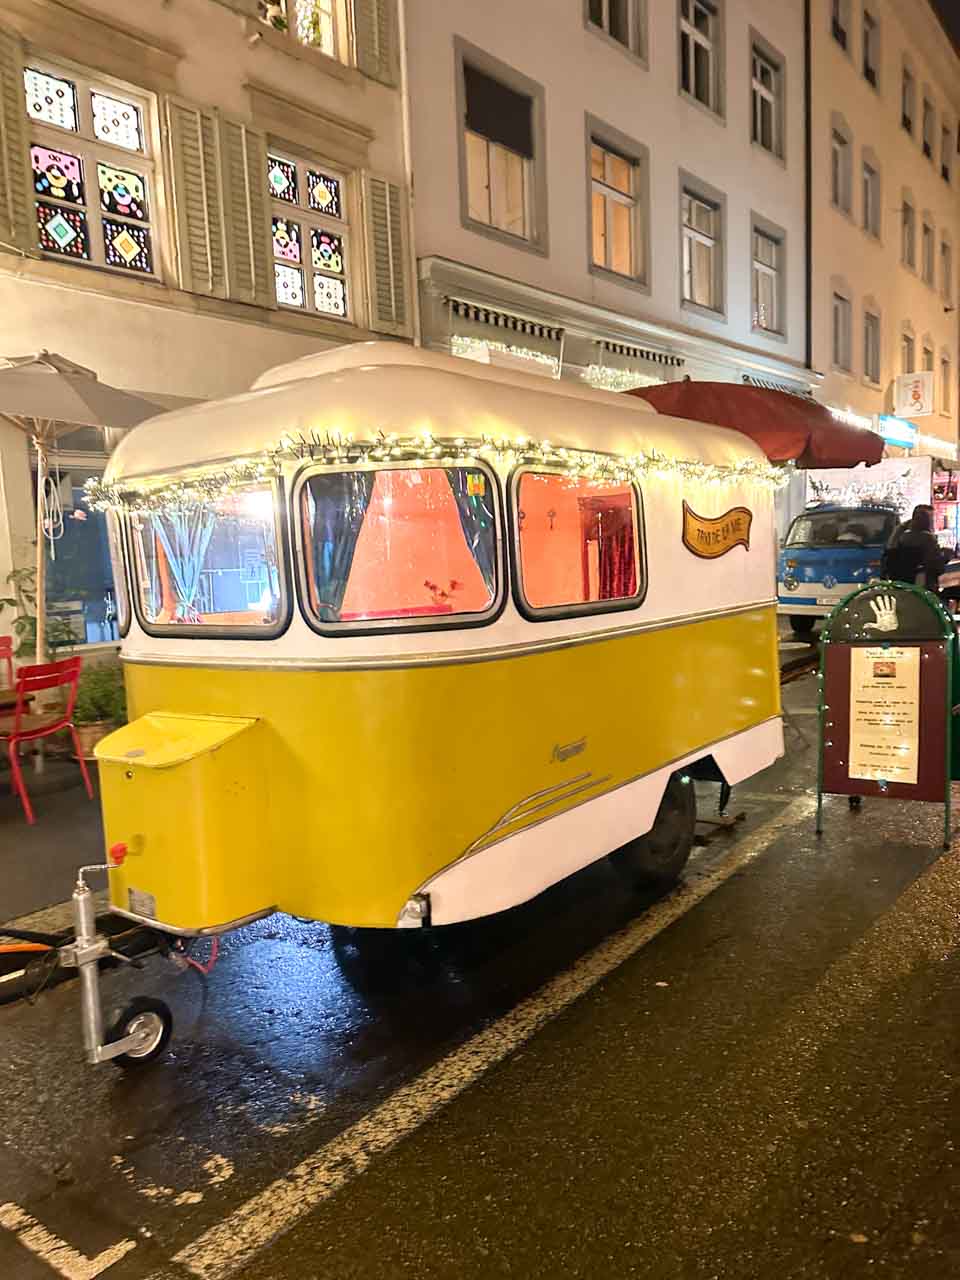 A vintage yellow trailer decorated with lights, serving as a food stall at the Adväntsgass im Glaibasel Christmas market in Basel